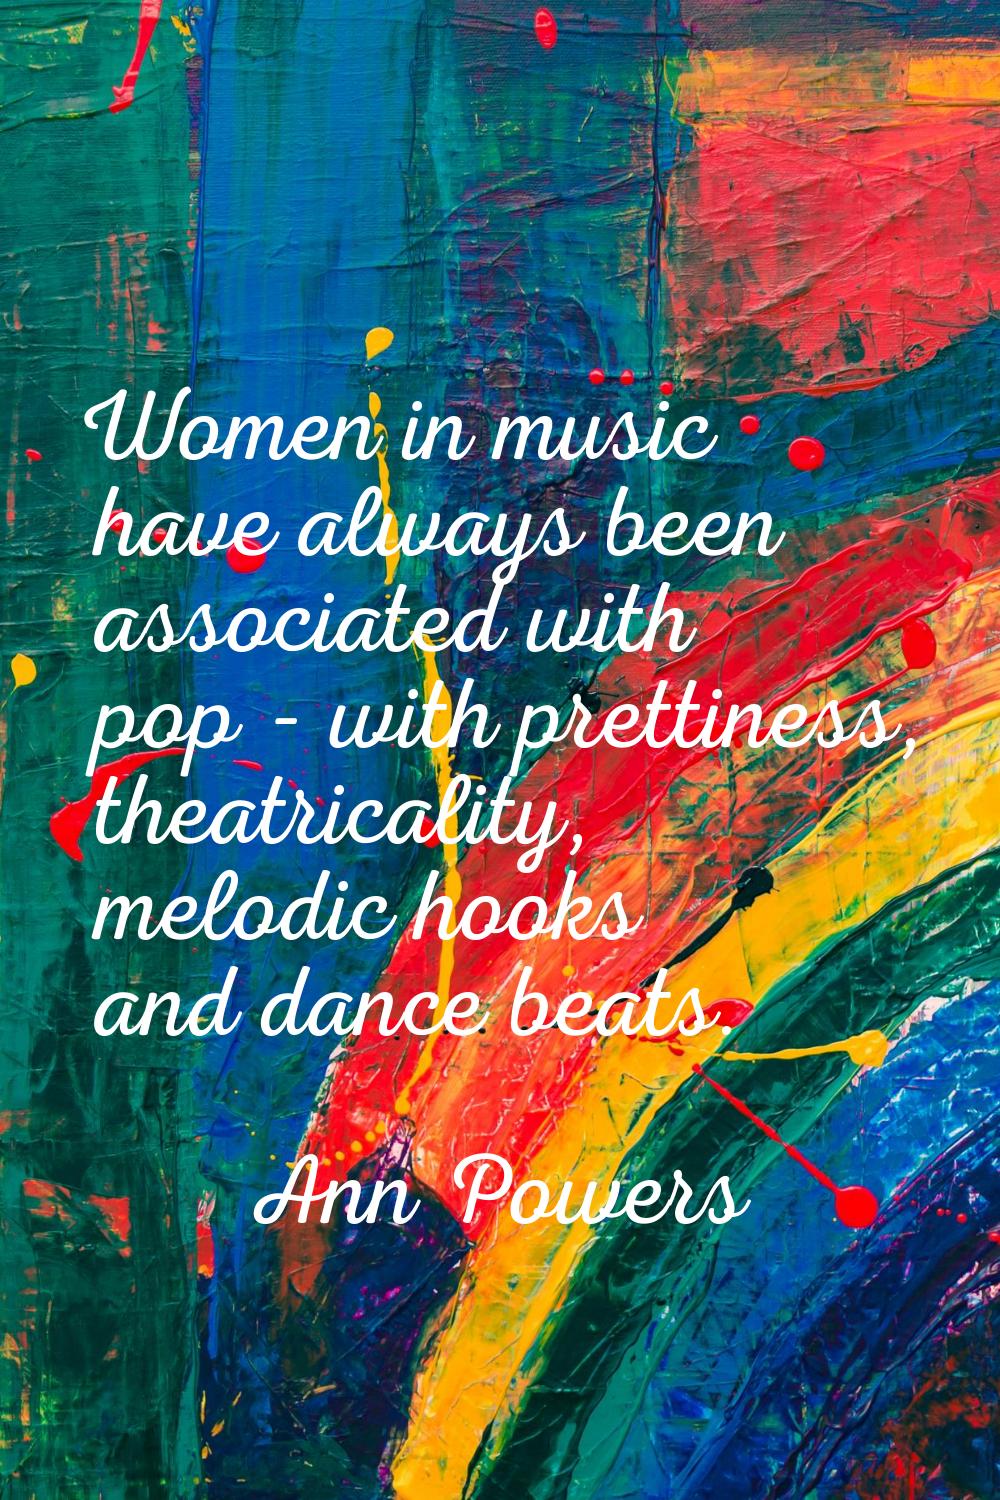 Women in music have always been associated with pop - with prettiness, theatricality, melodic hooks